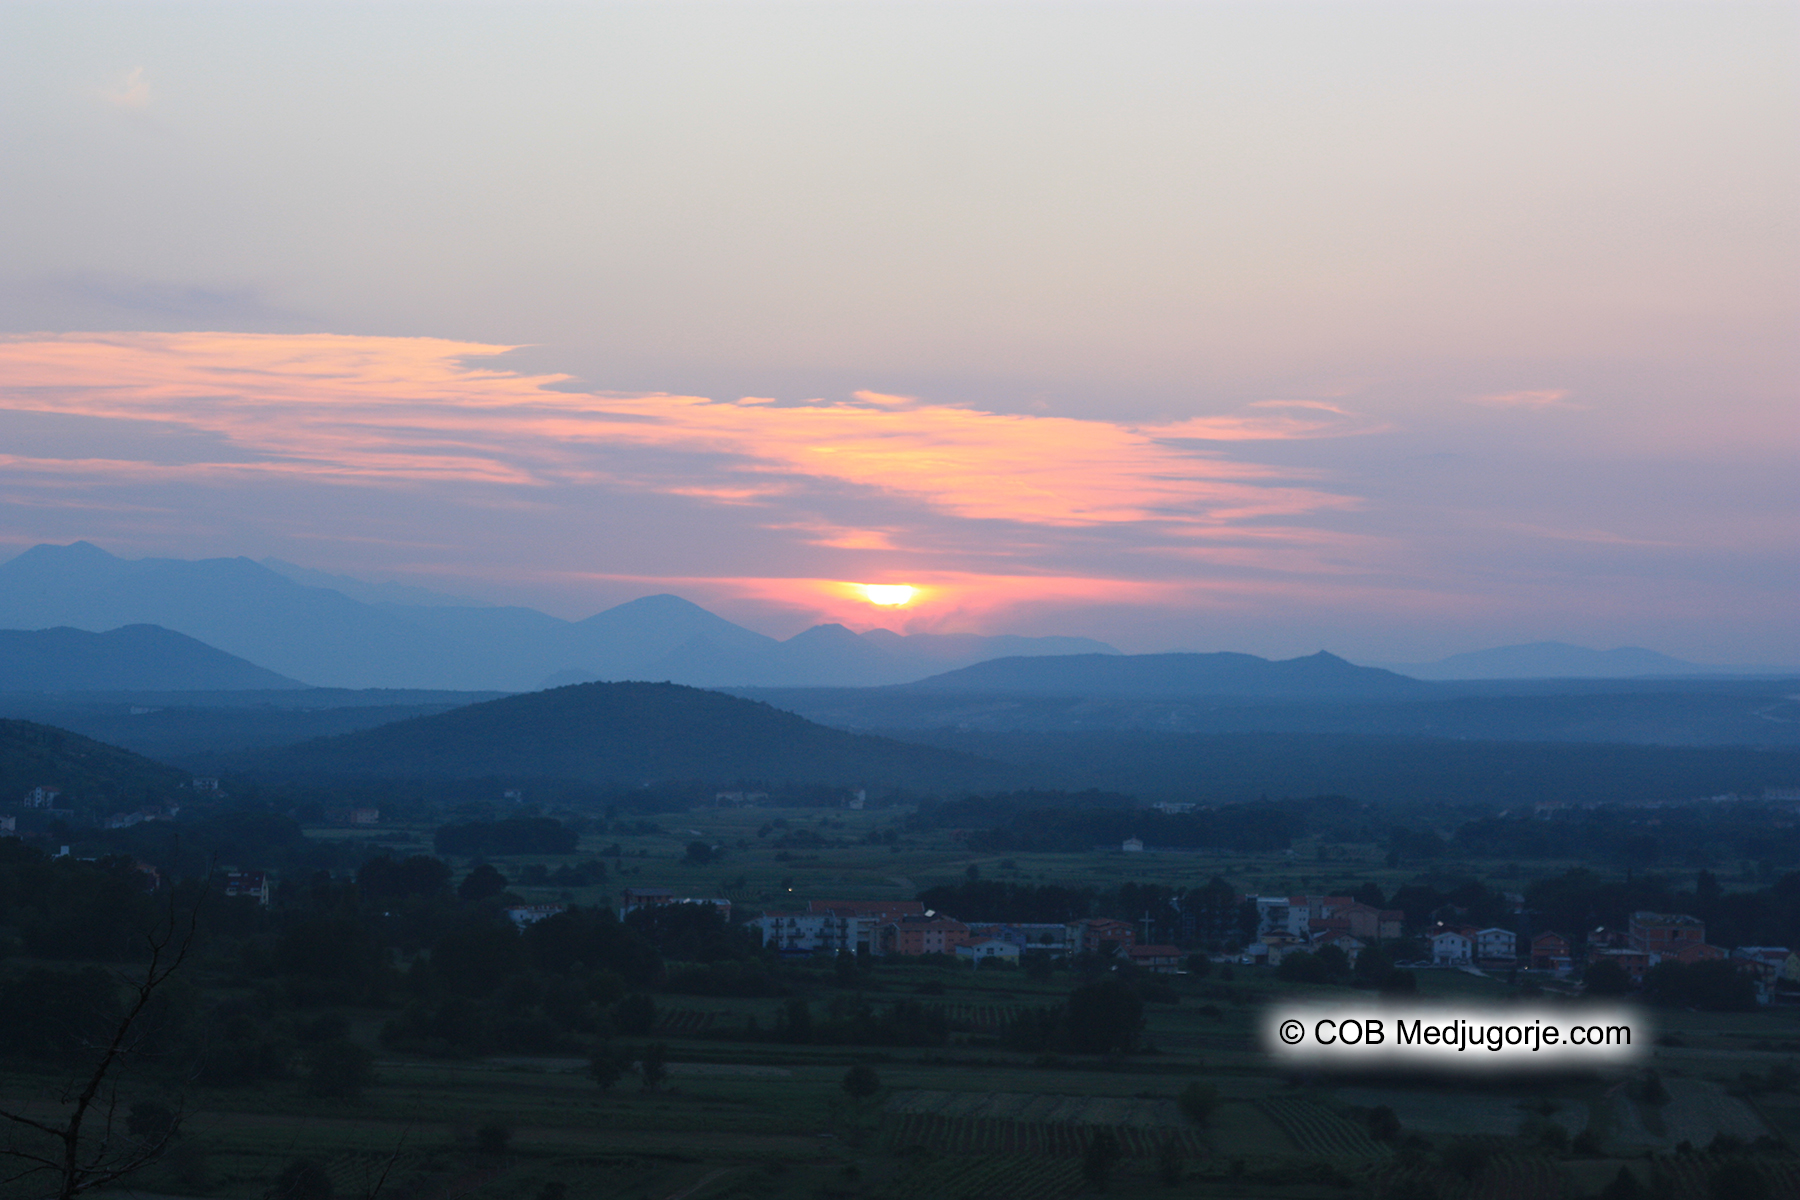 Sunset in Medjugorje May 20, 2011